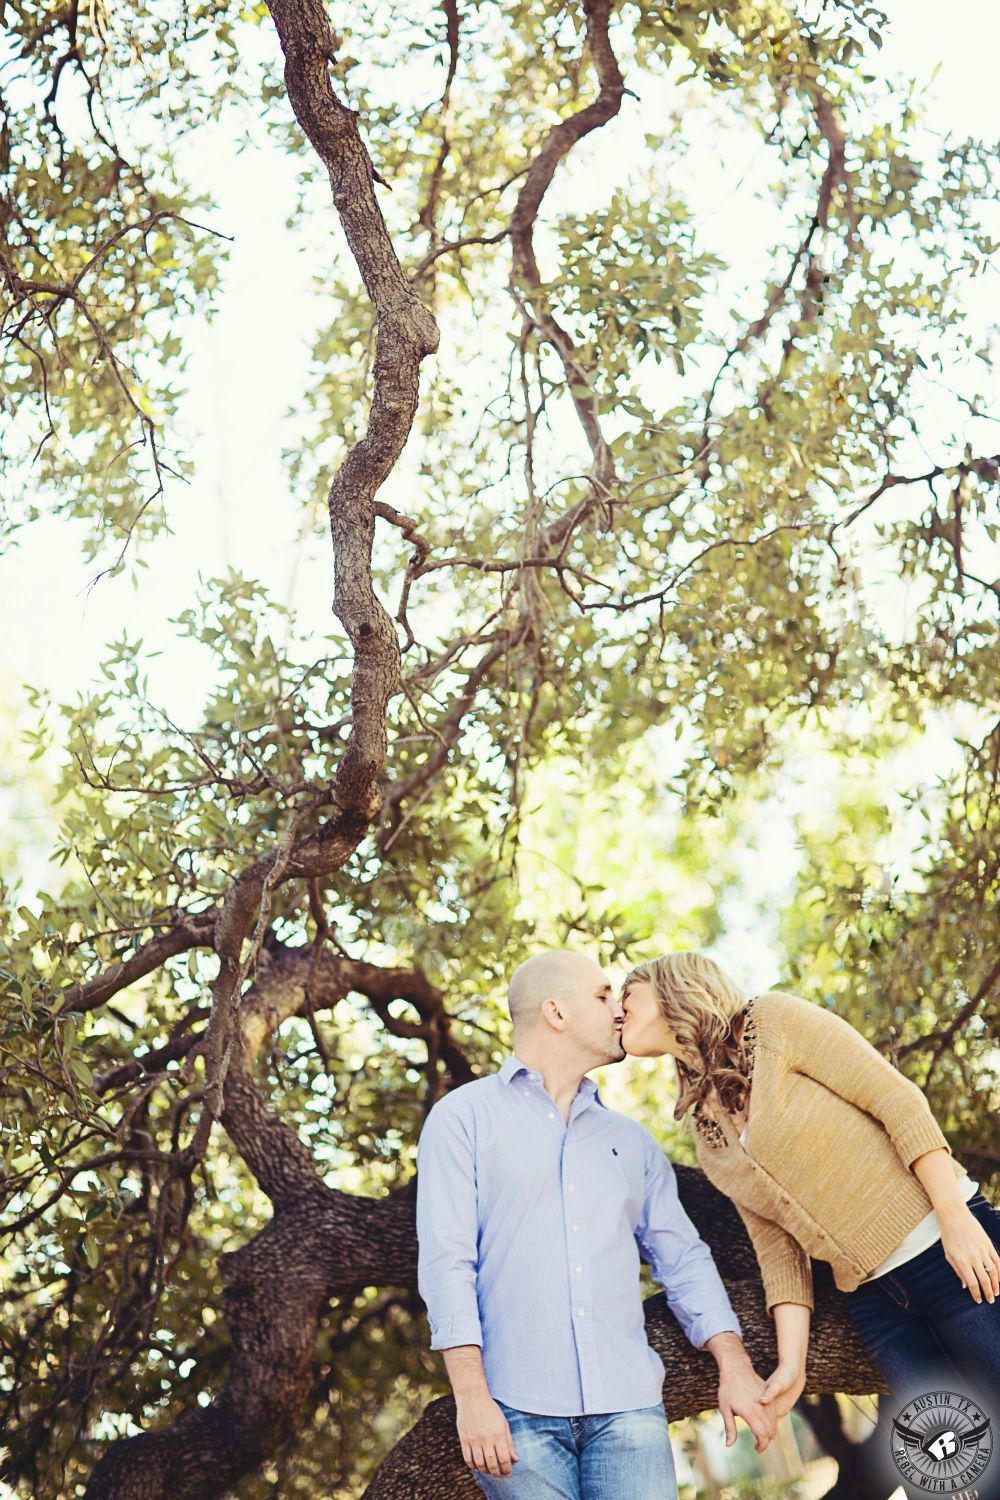 Curly blond woman in a tan button up sweater and blue jeans leans in and kisses guy wearing a light blue button up dress shirt and washed out blue jeans while holding hands in front of scattered tree branches, leaves and the bright sky in this fanciful engagement image at the Capitol of Texas in Austin.